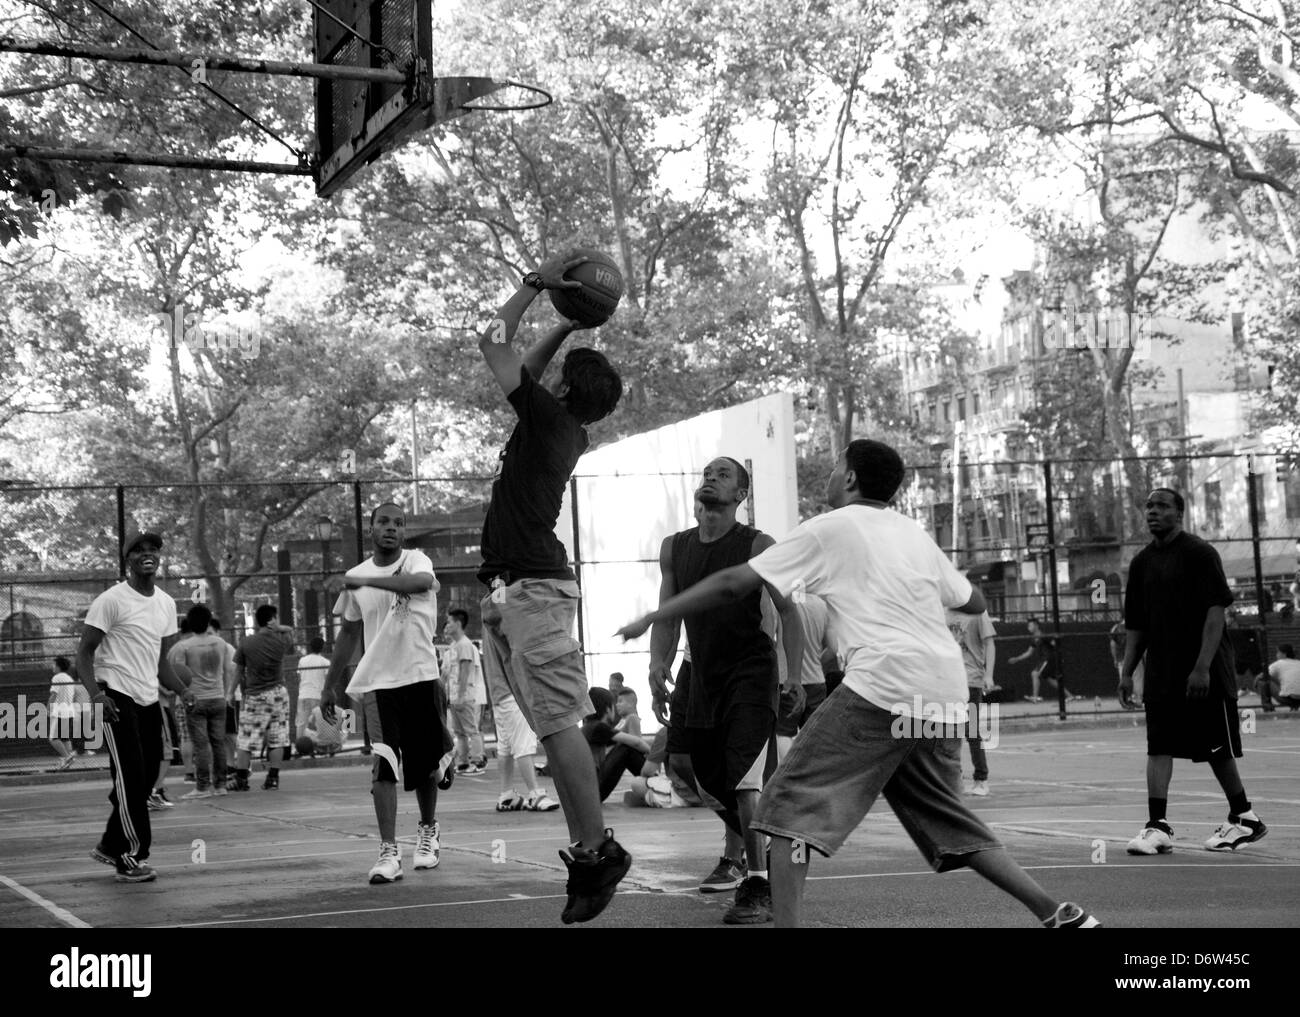 Young Men playing basketball in a park in Chinatown in New York City, USA Stock Photo